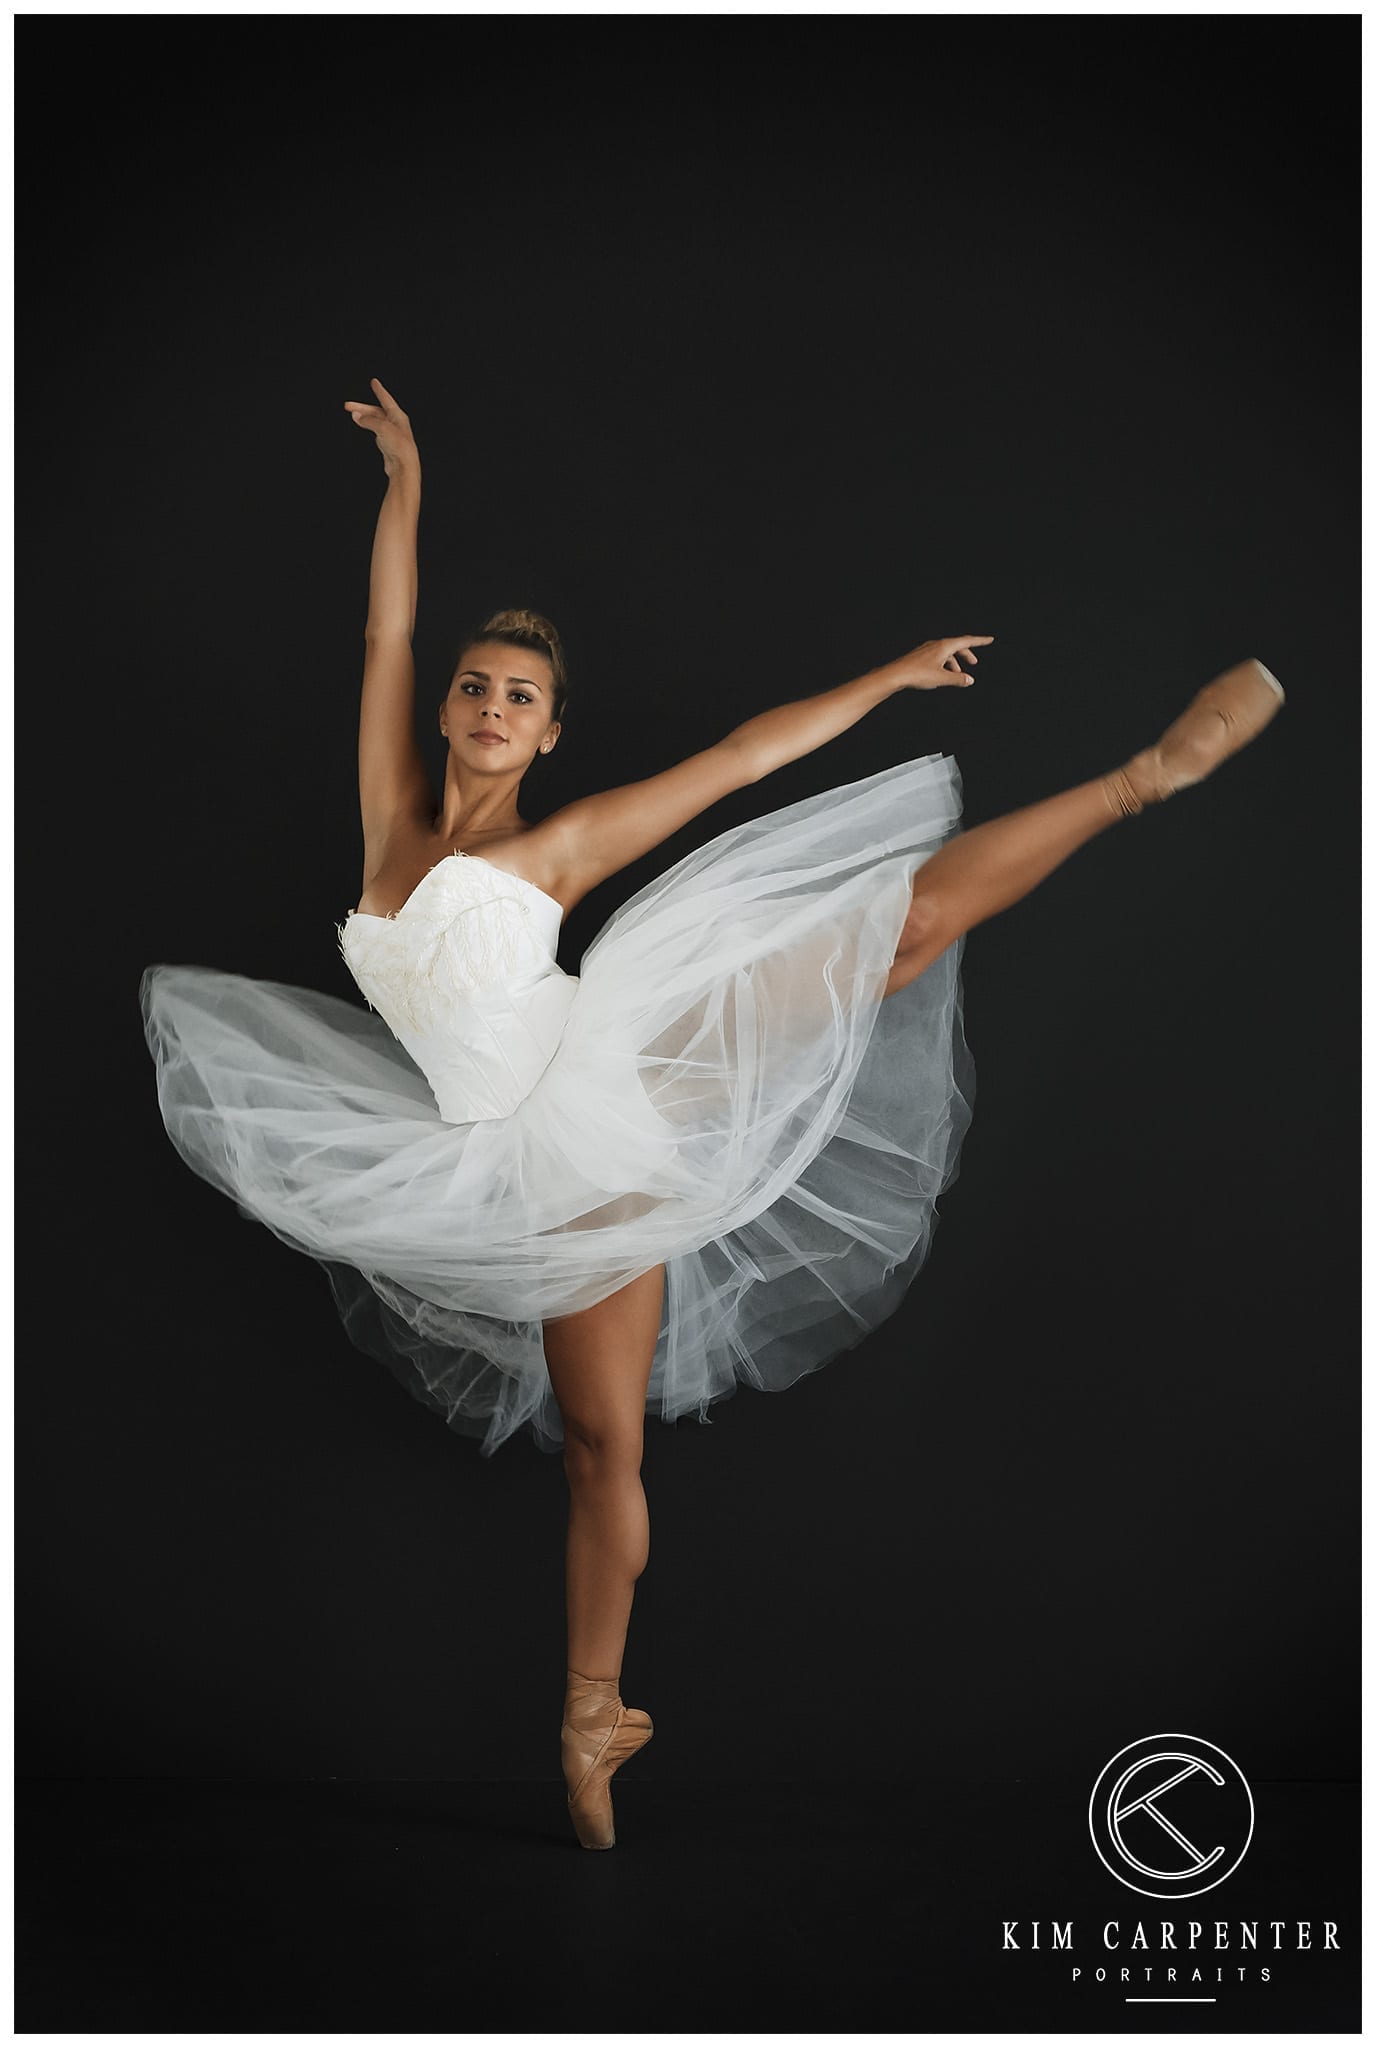 A black background with a dancer dressed in white with one leg high.